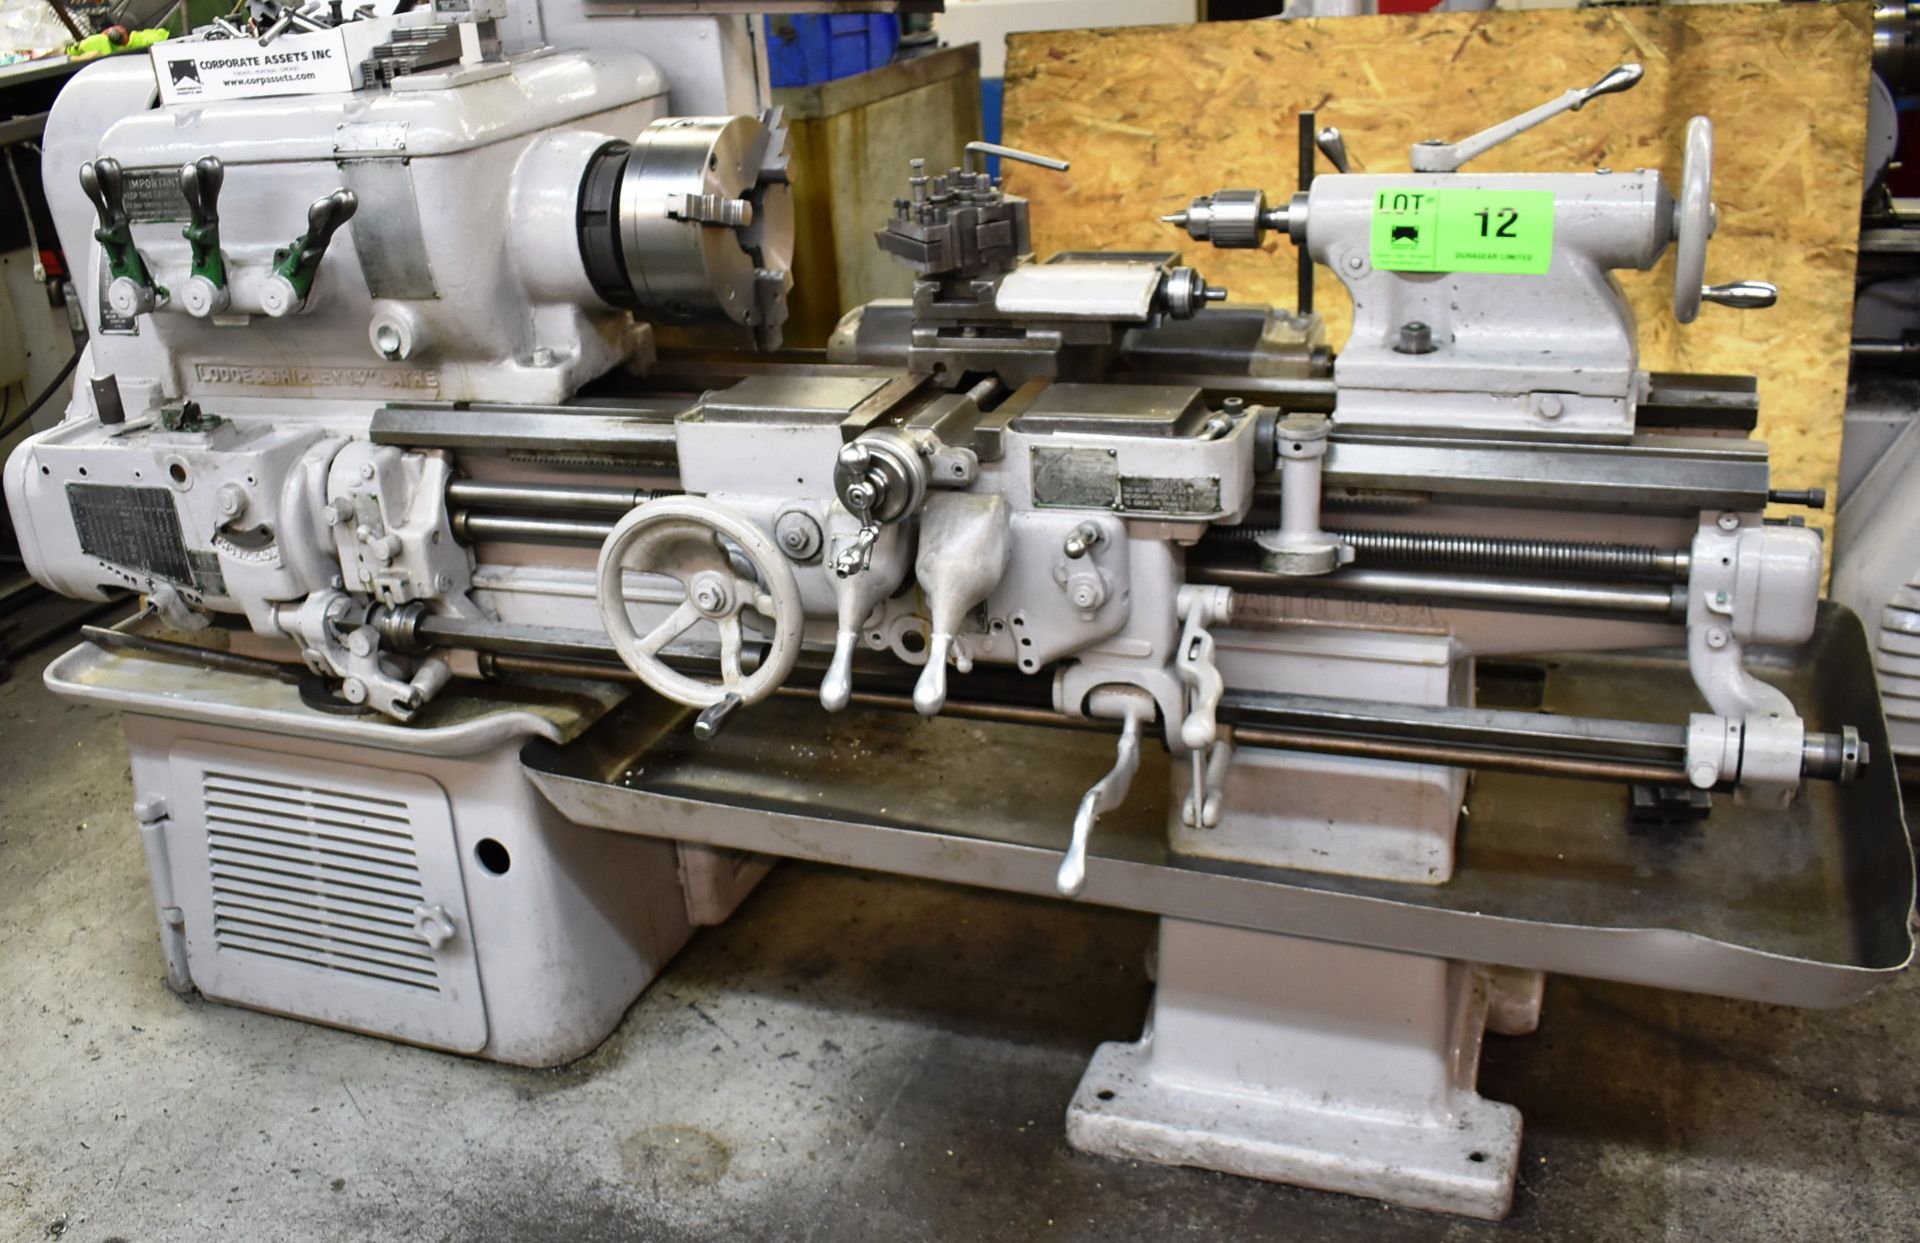 LODGE & SHIPLEY 14" LATHE WITH 17" SWING OVER BED, 30" BETWEEN CENTERS, 2" SPINDLE BORE, 10" 3 JAW